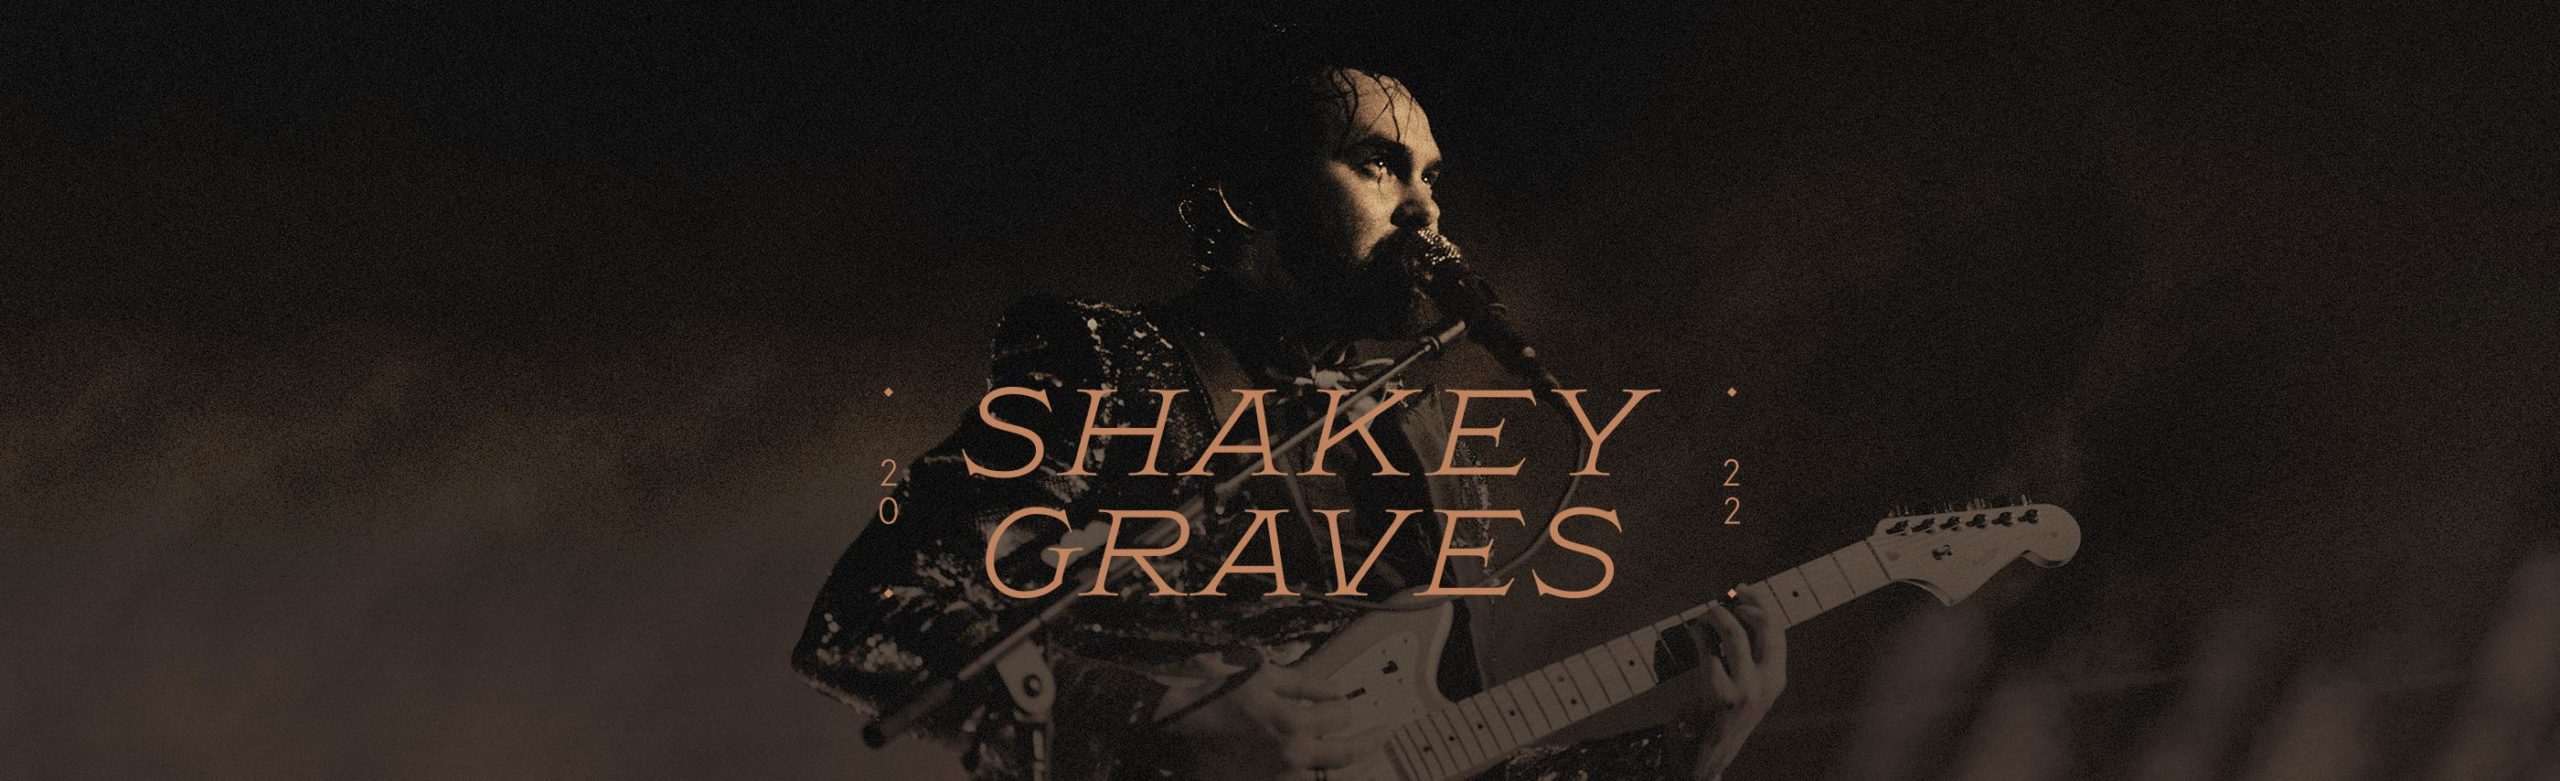 Shakey Graves Confirms Return to KettleHouse Amphitheater with Sierra Ferrell Image